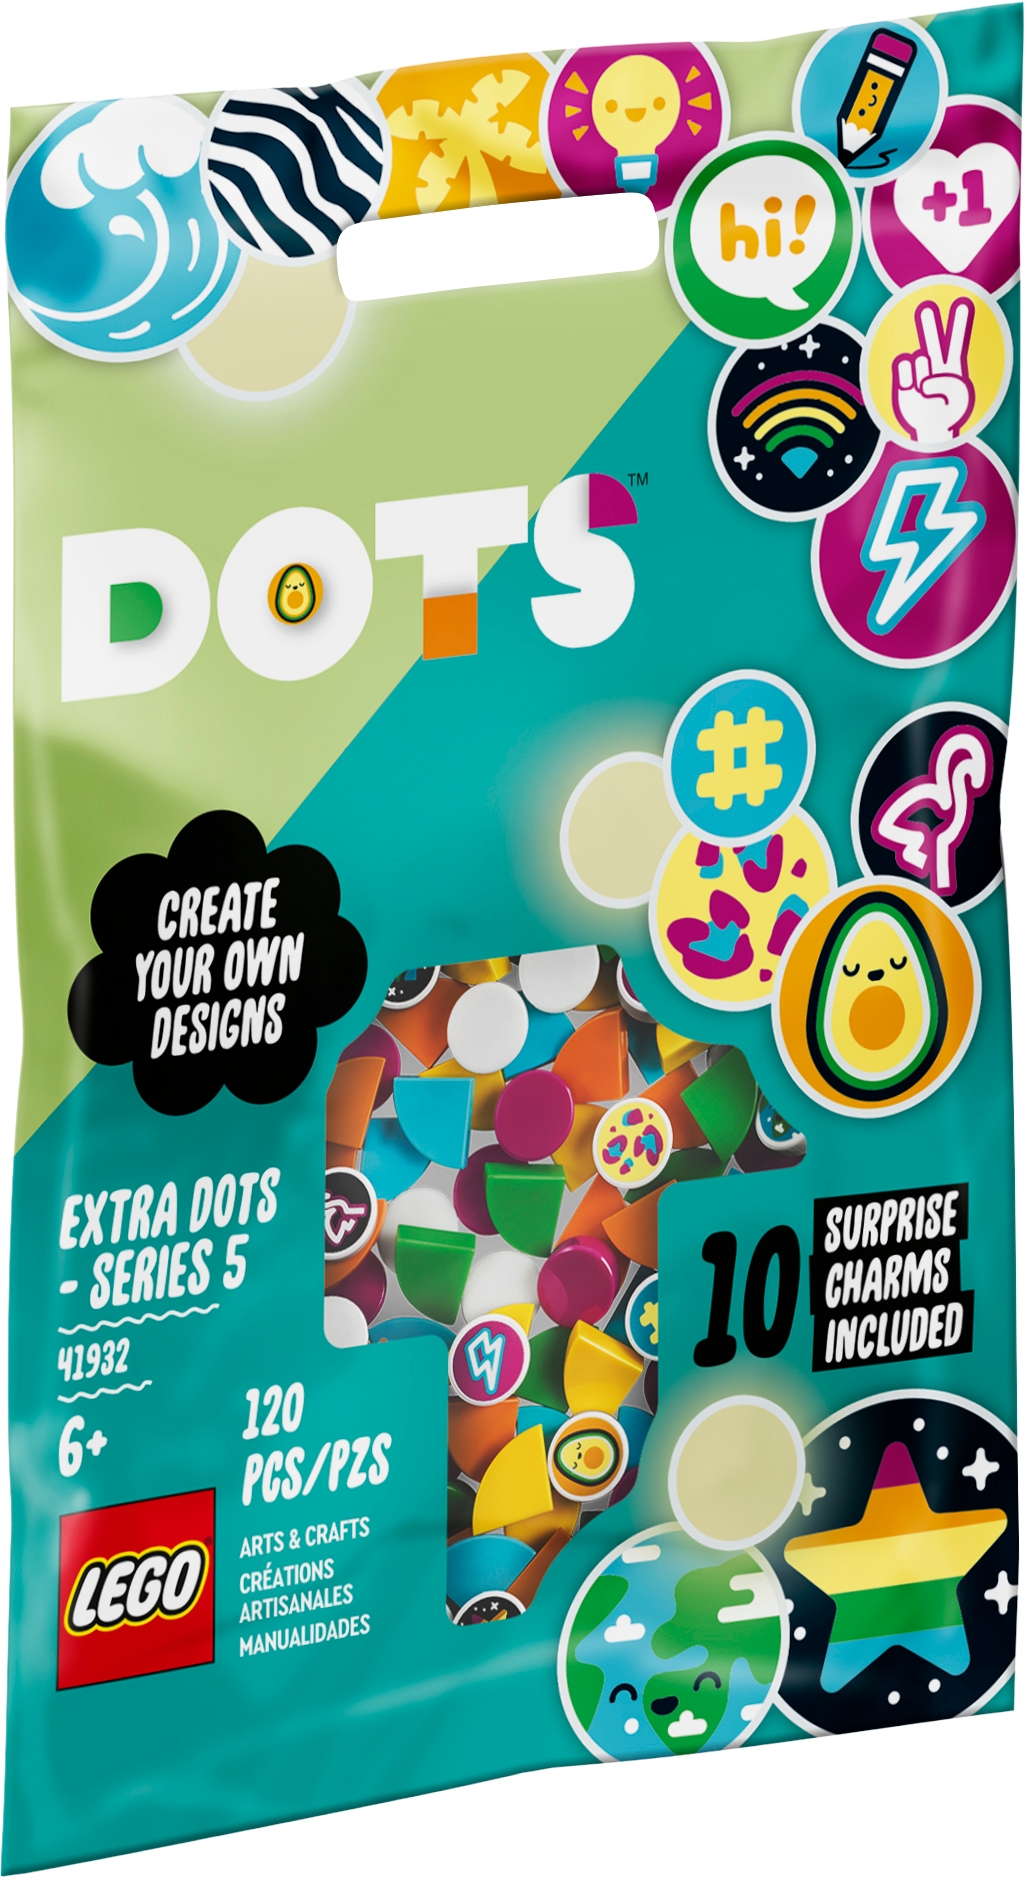 series 1 DOTS LEGO Extra DOTS 41908 for sale online